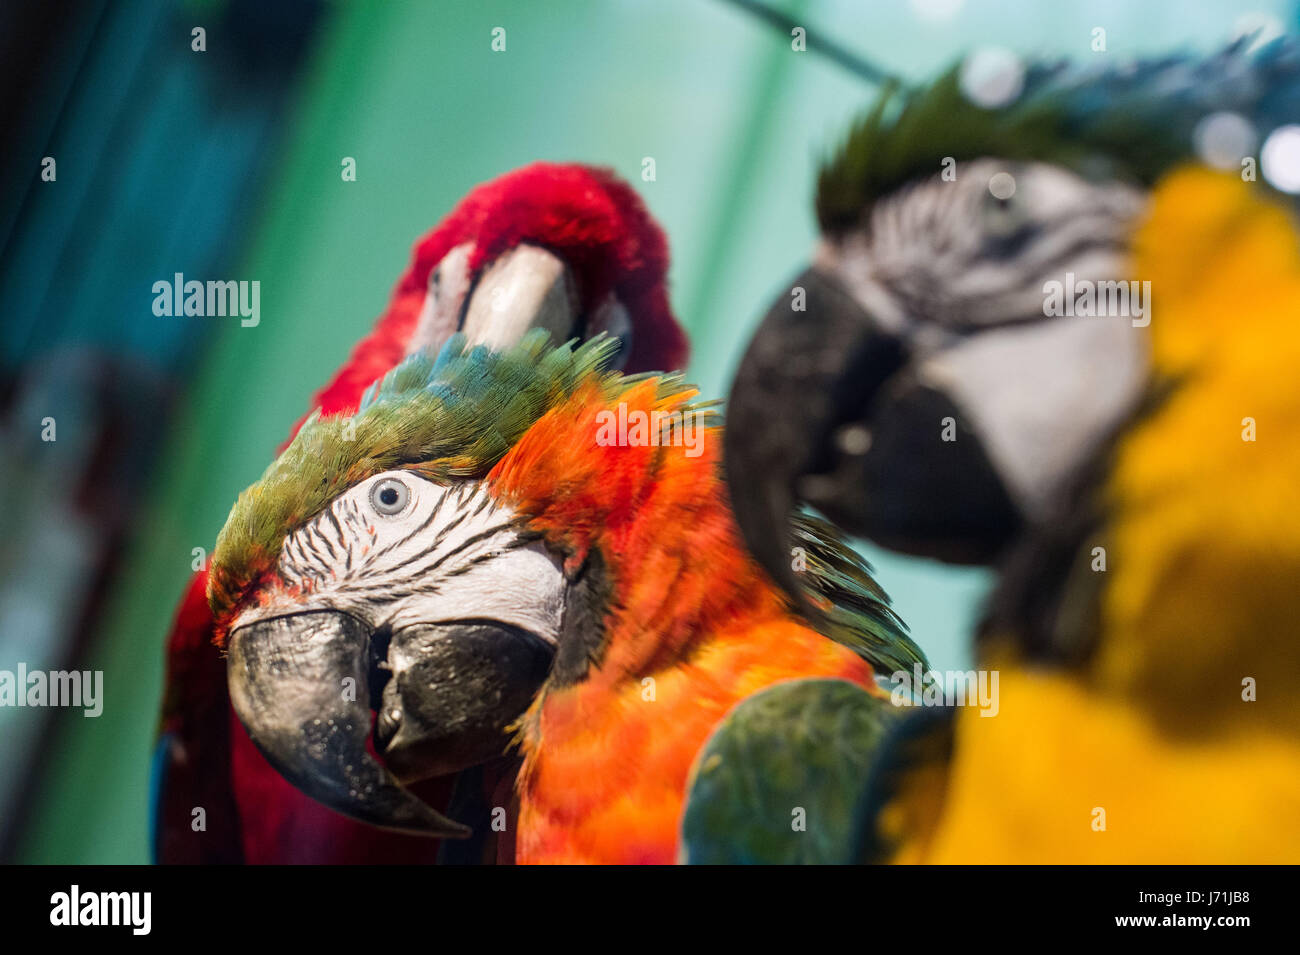 Berlin, Germany. 22nd May, 2017. A stuffed blue-and-yellow macaw (r) and  Red-and-green macaw, at the Naturkundemuseum (Natural History Museum) in  Berlin, Germany, 22 May 2017. The special exhibition "ARA" (Macaw) at the